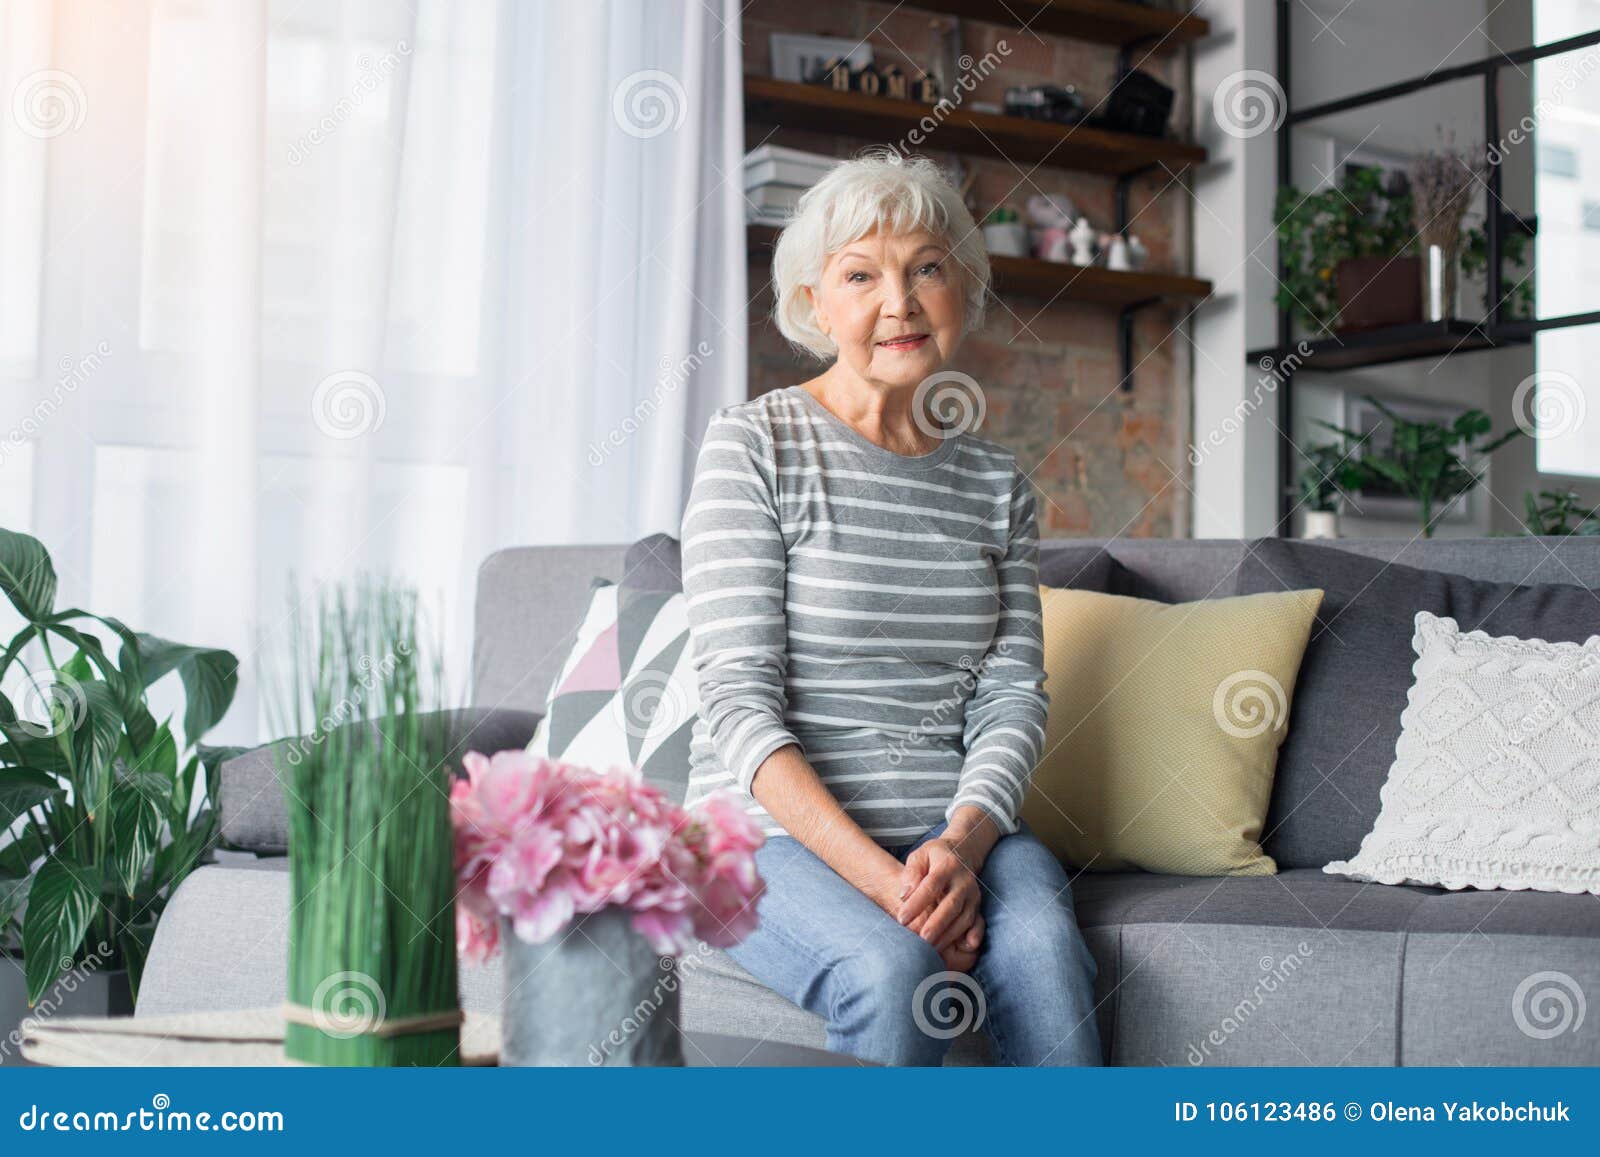 old lady living room